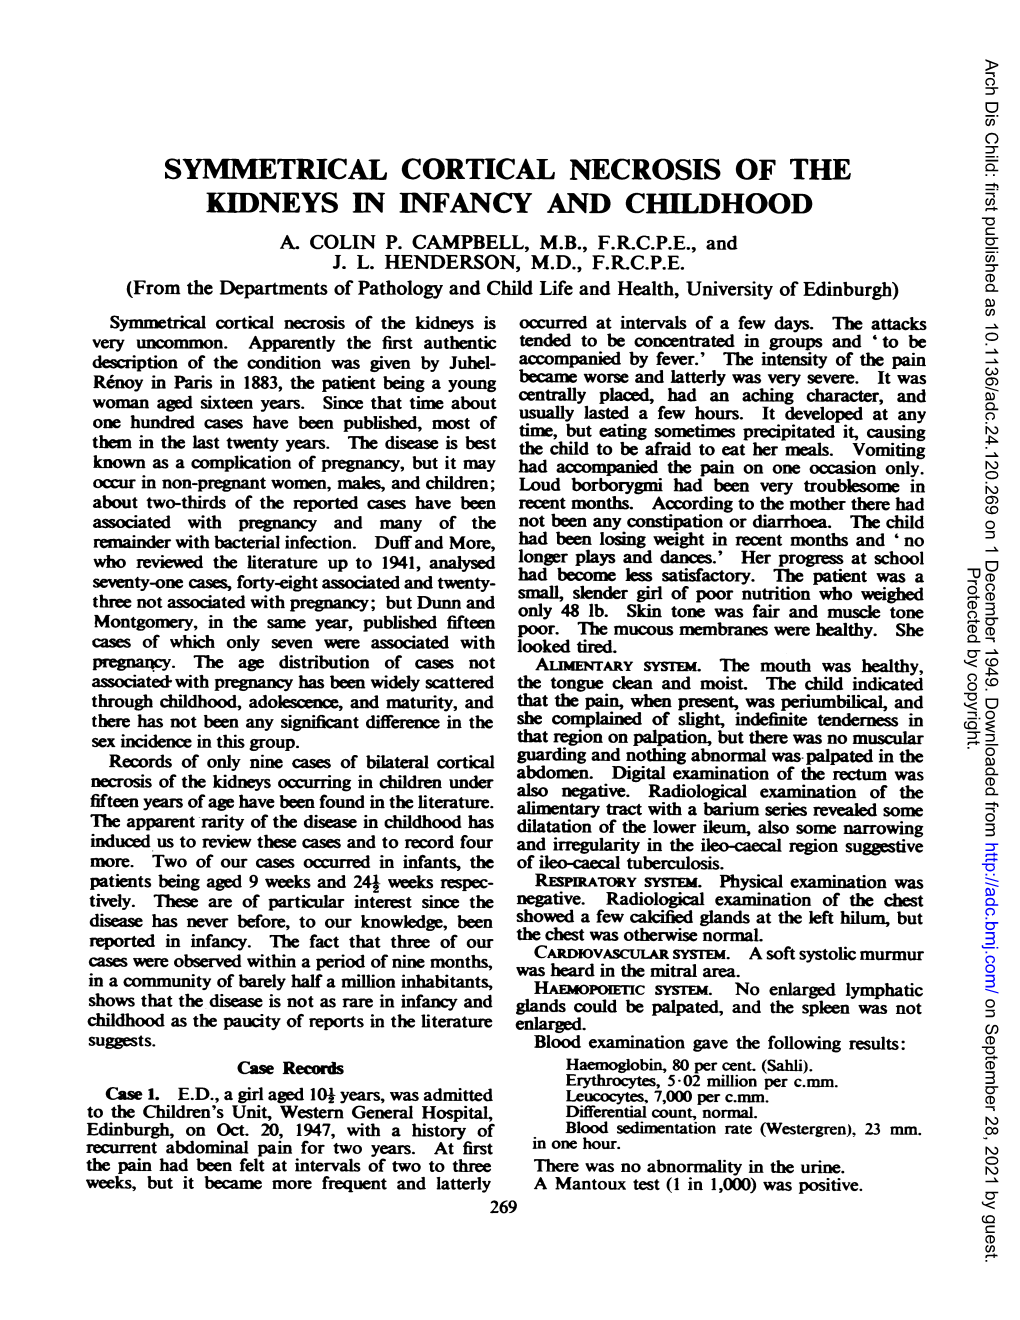 Symmetrical Cortical Necrosis of the Kidneys in Infancy and Childhood A